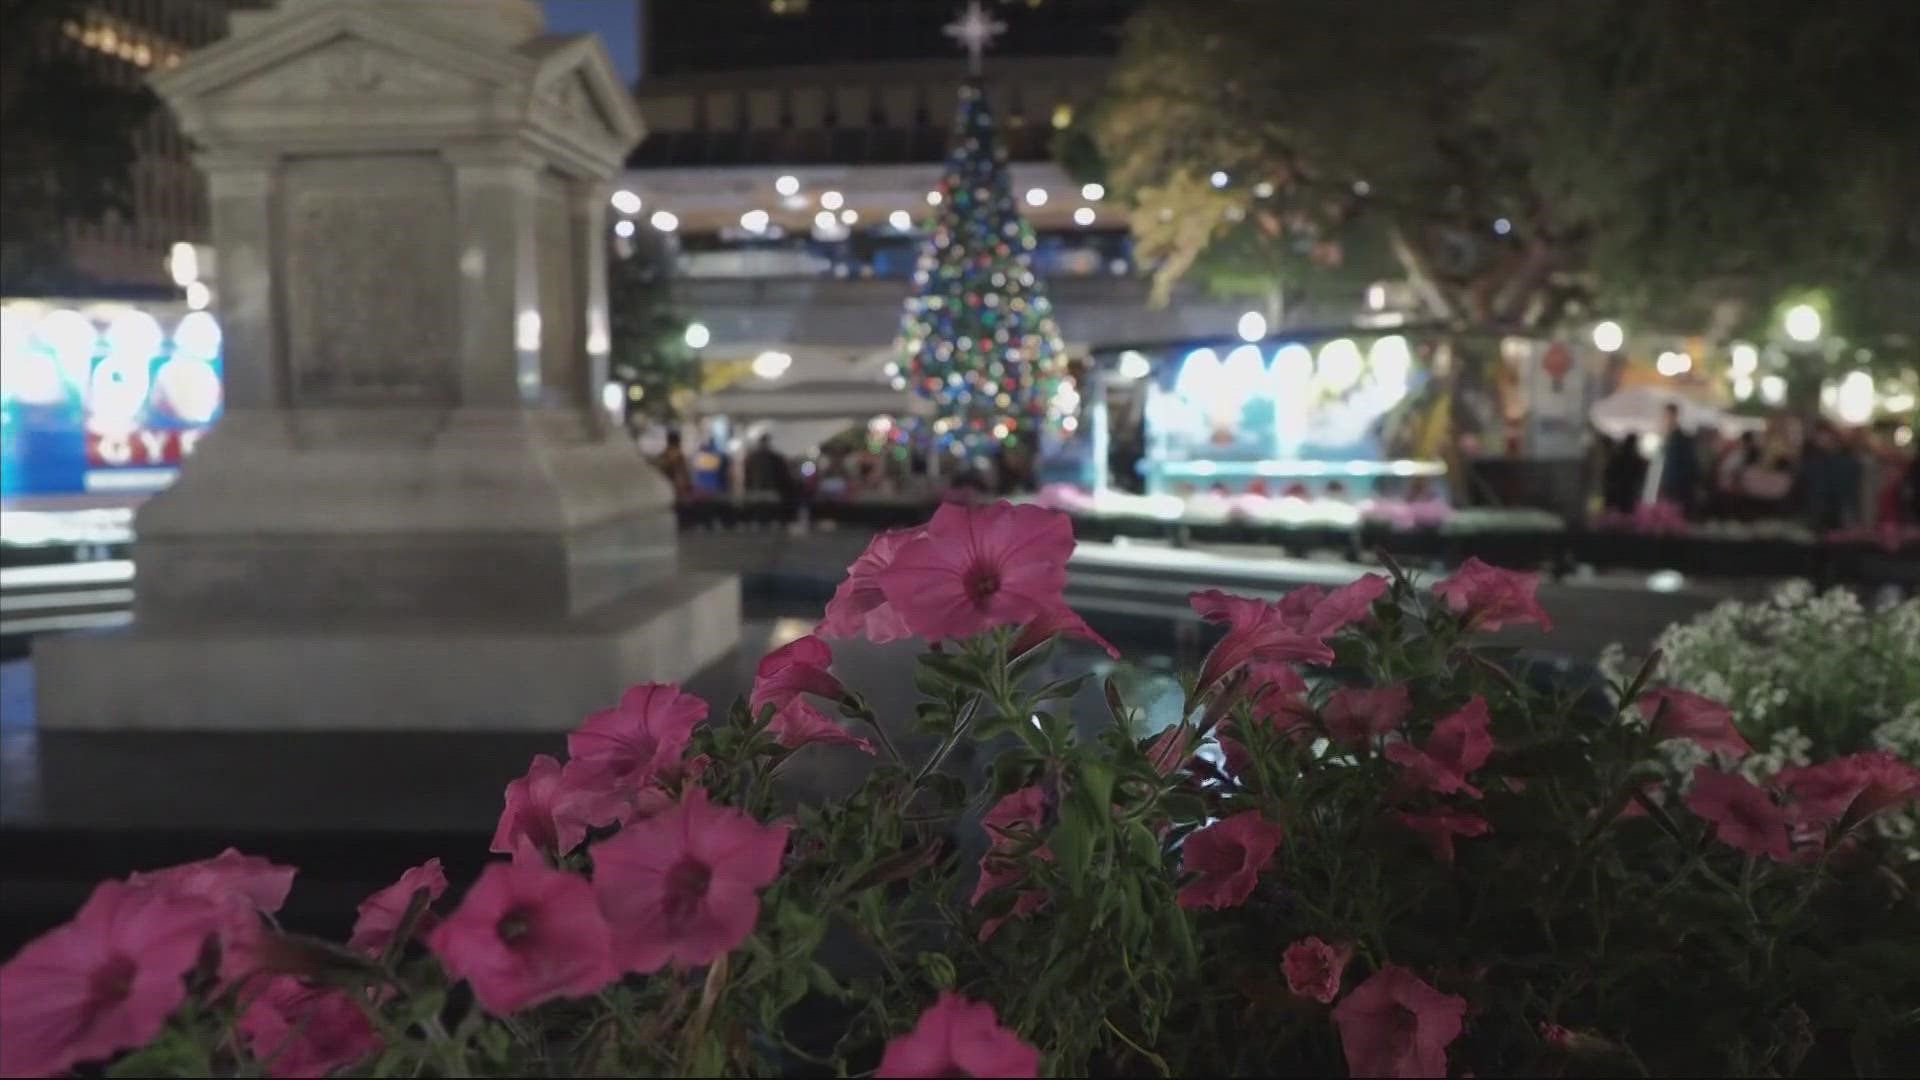 The Holiday Art Walk starts at 5:00 p.m. with the Christmas tree lighting at 6:15 p.m.